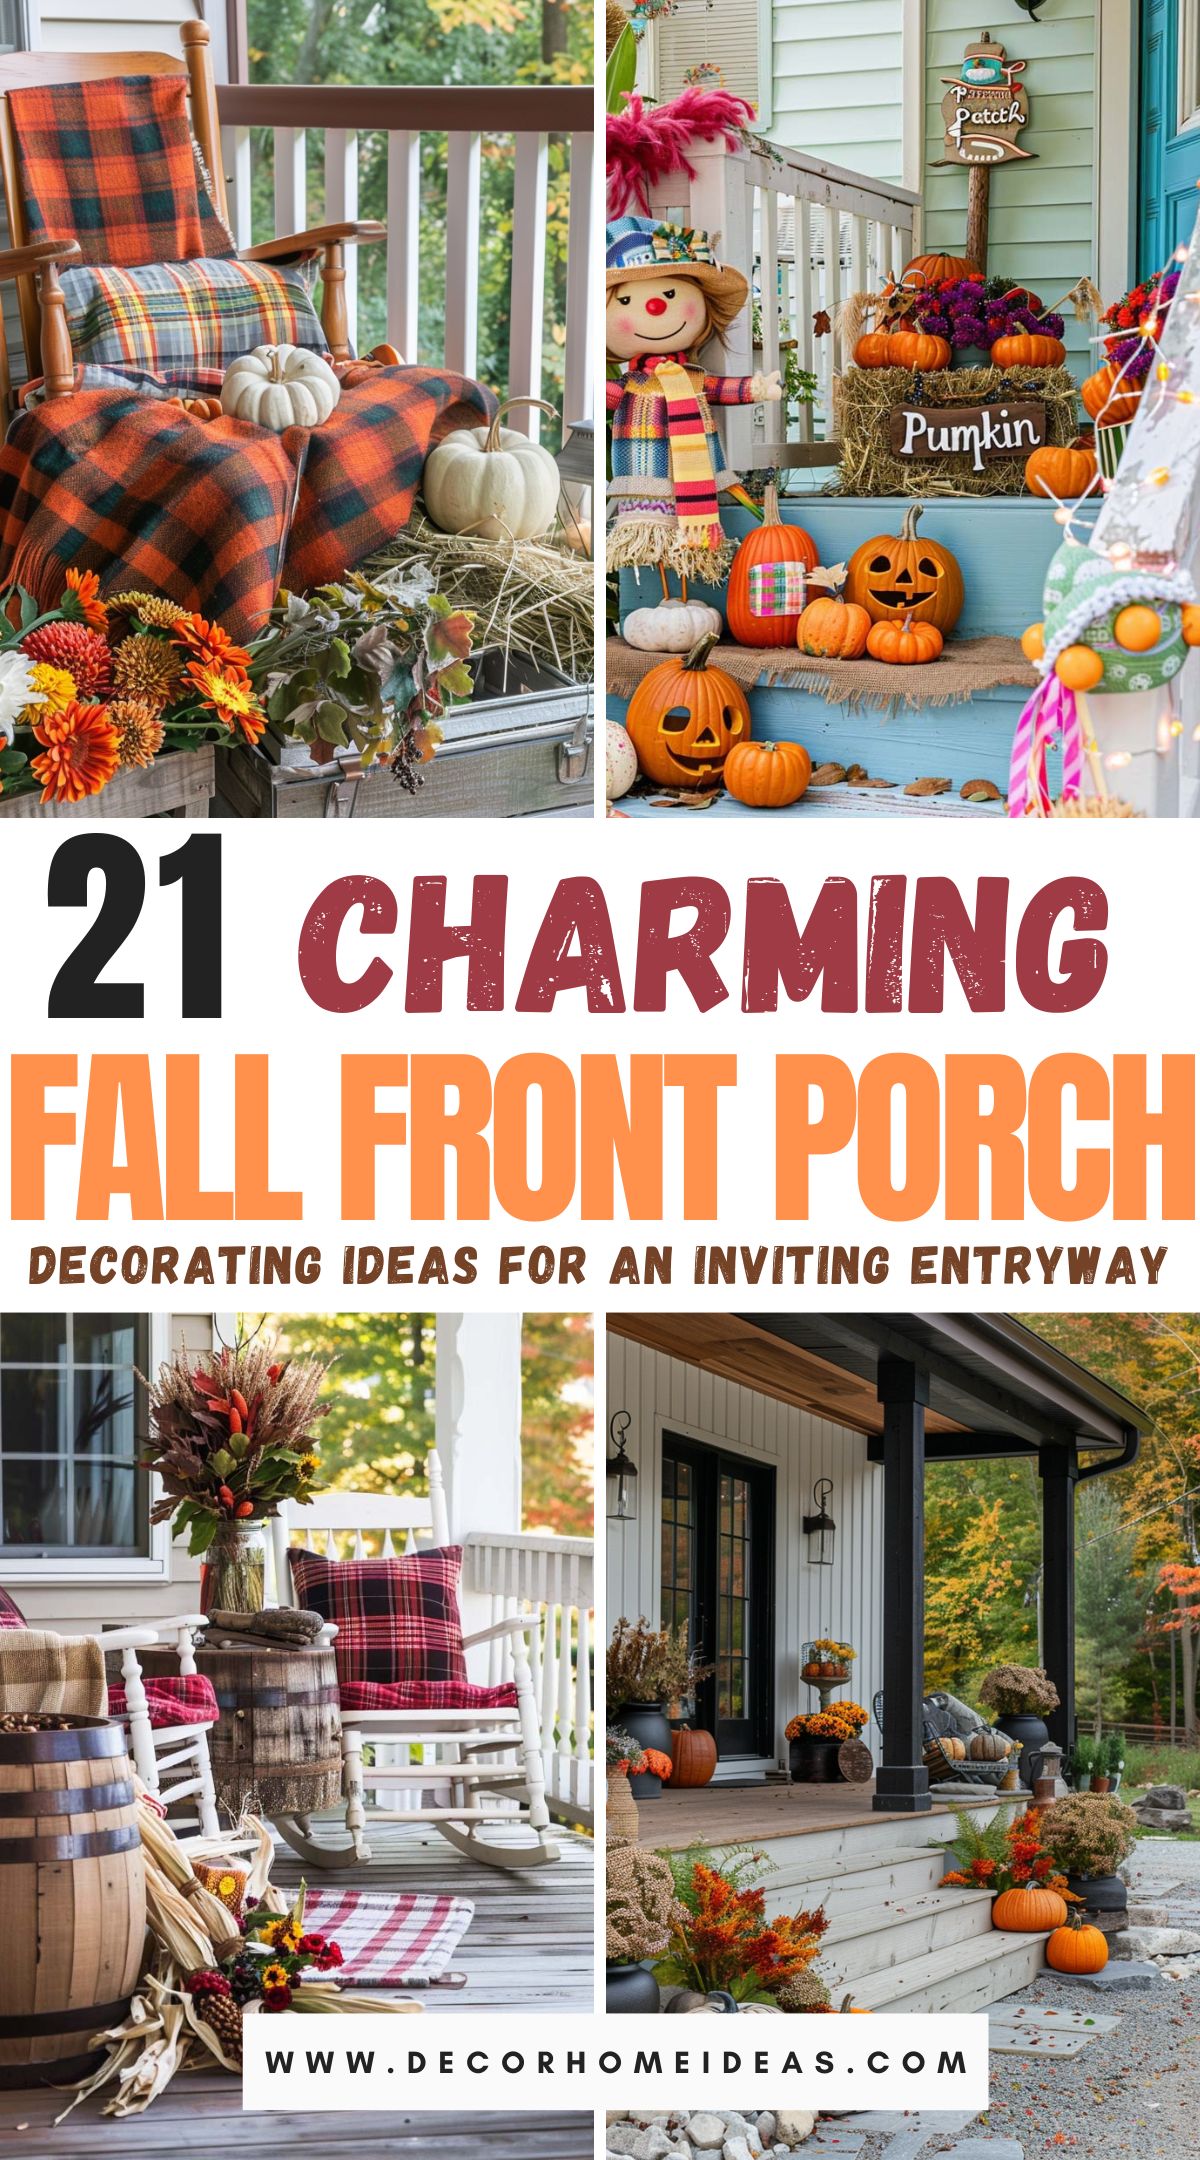 Create an inviting entryway with these 15 charming fall front porch decorating ideas. Embrace the season with warm hues, cozy textures, and festive touches. From vibrant pumpkins and rustic wreaths to cozy lanterns and plaid blankets, discover how to transform your porch into a welcoming autumn retreat that captures the essence of fall.